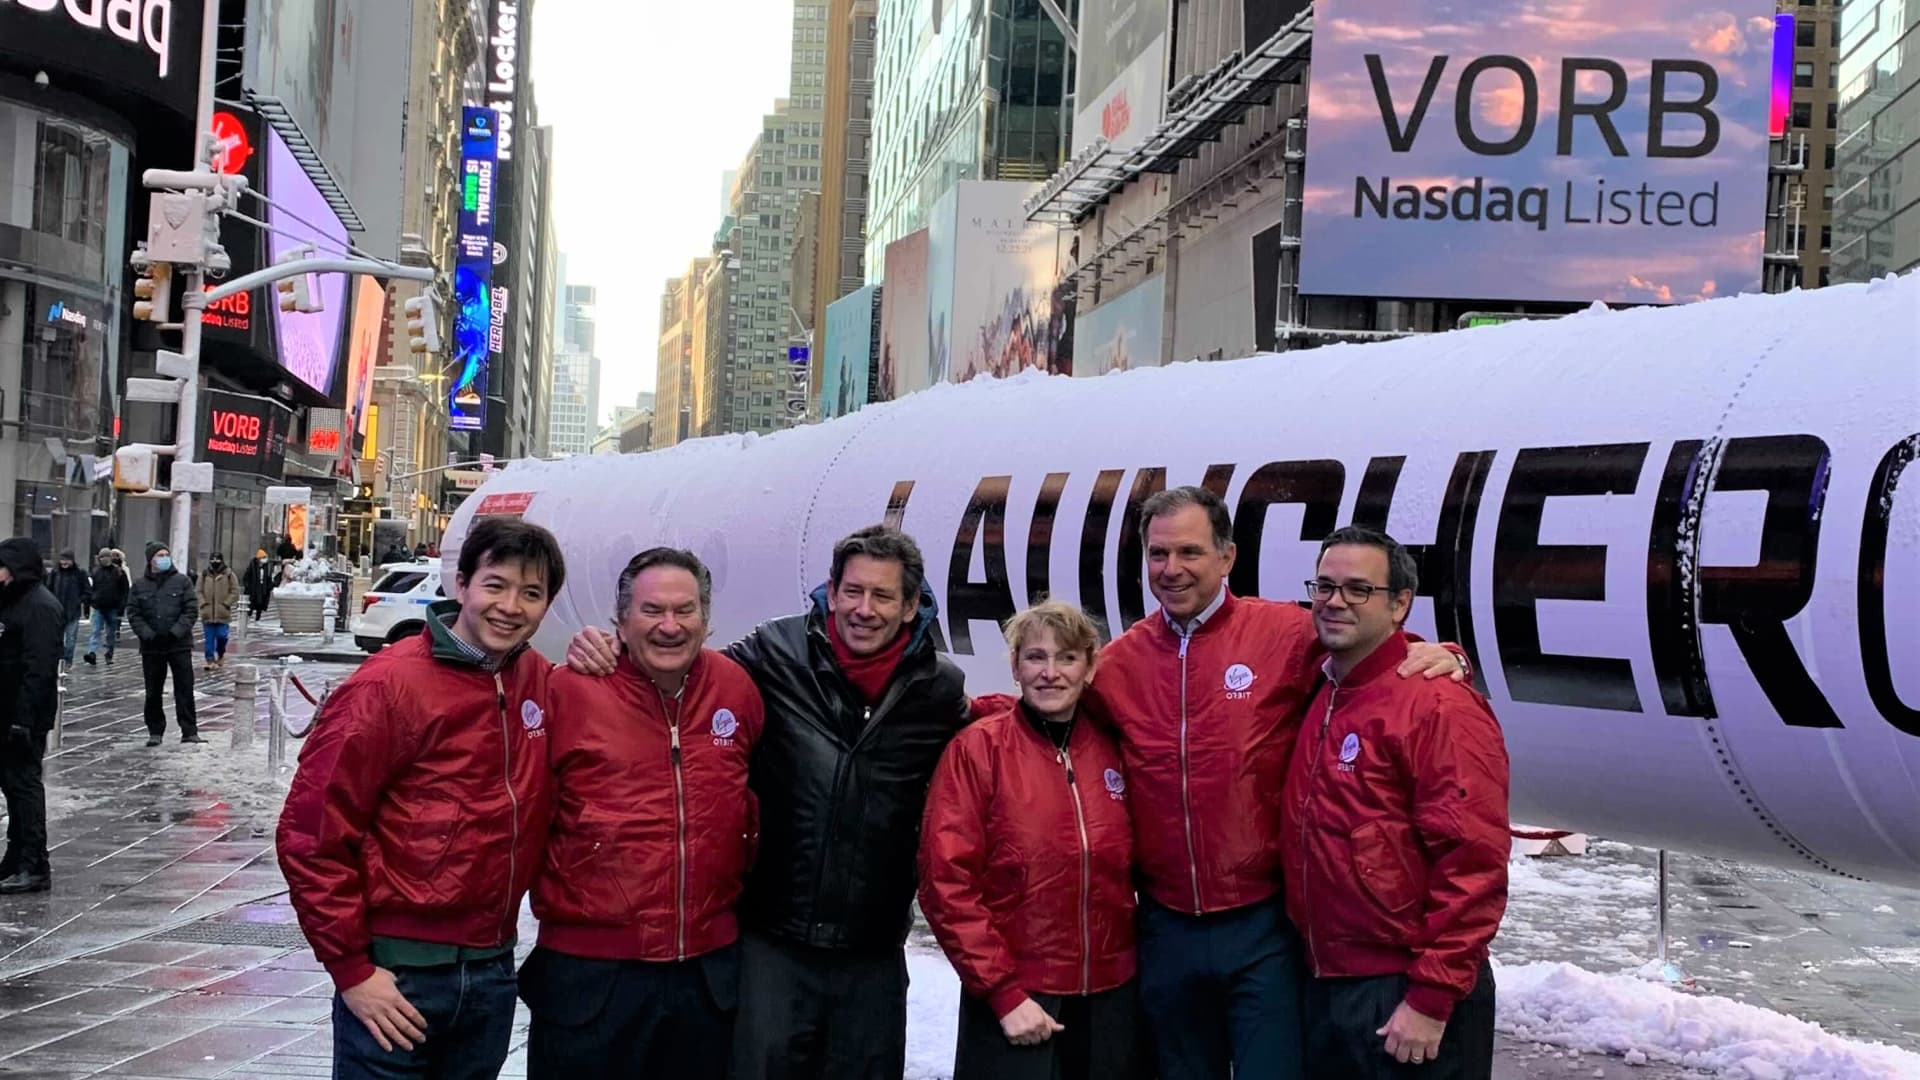 Virgin Orbit CEO Dan Hart (center, black jacket) stands with company executives in Times Square, New York.